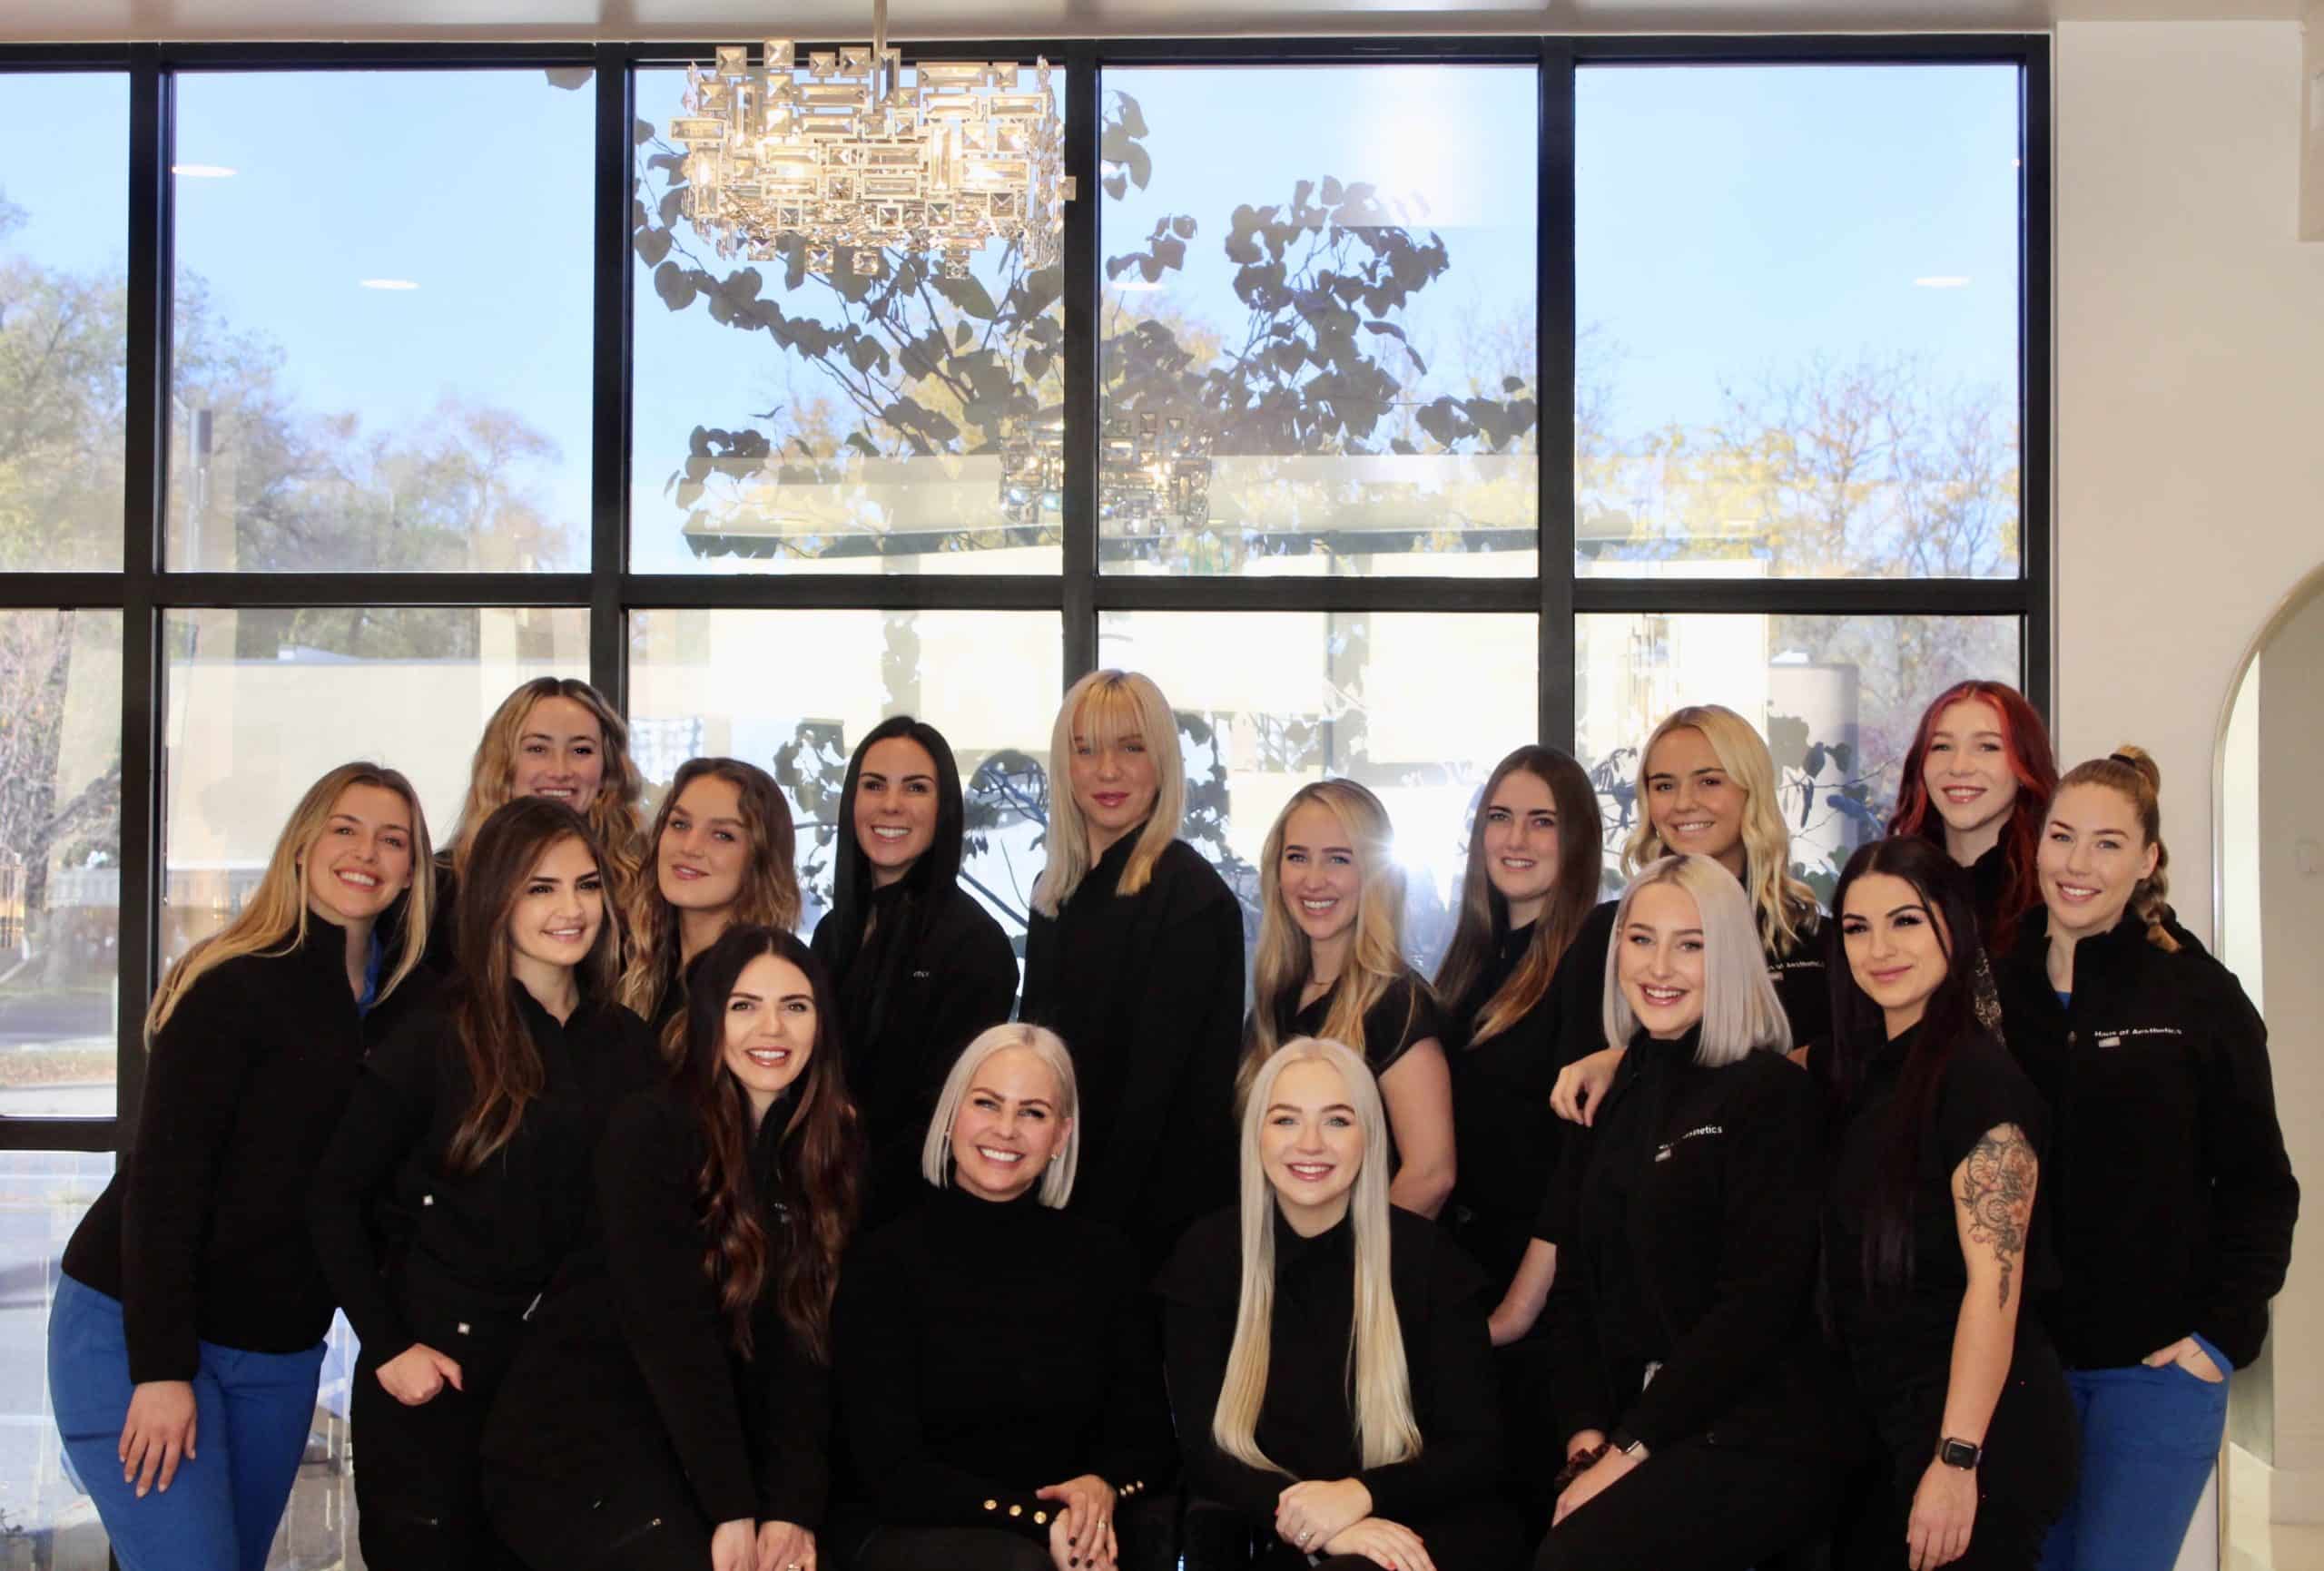 Haus of aesthetics team standing together smiling in front of a large window inside the beautiful med spa in Salt Lake City. Career opportunities for anyone in the Aesthetics industry.